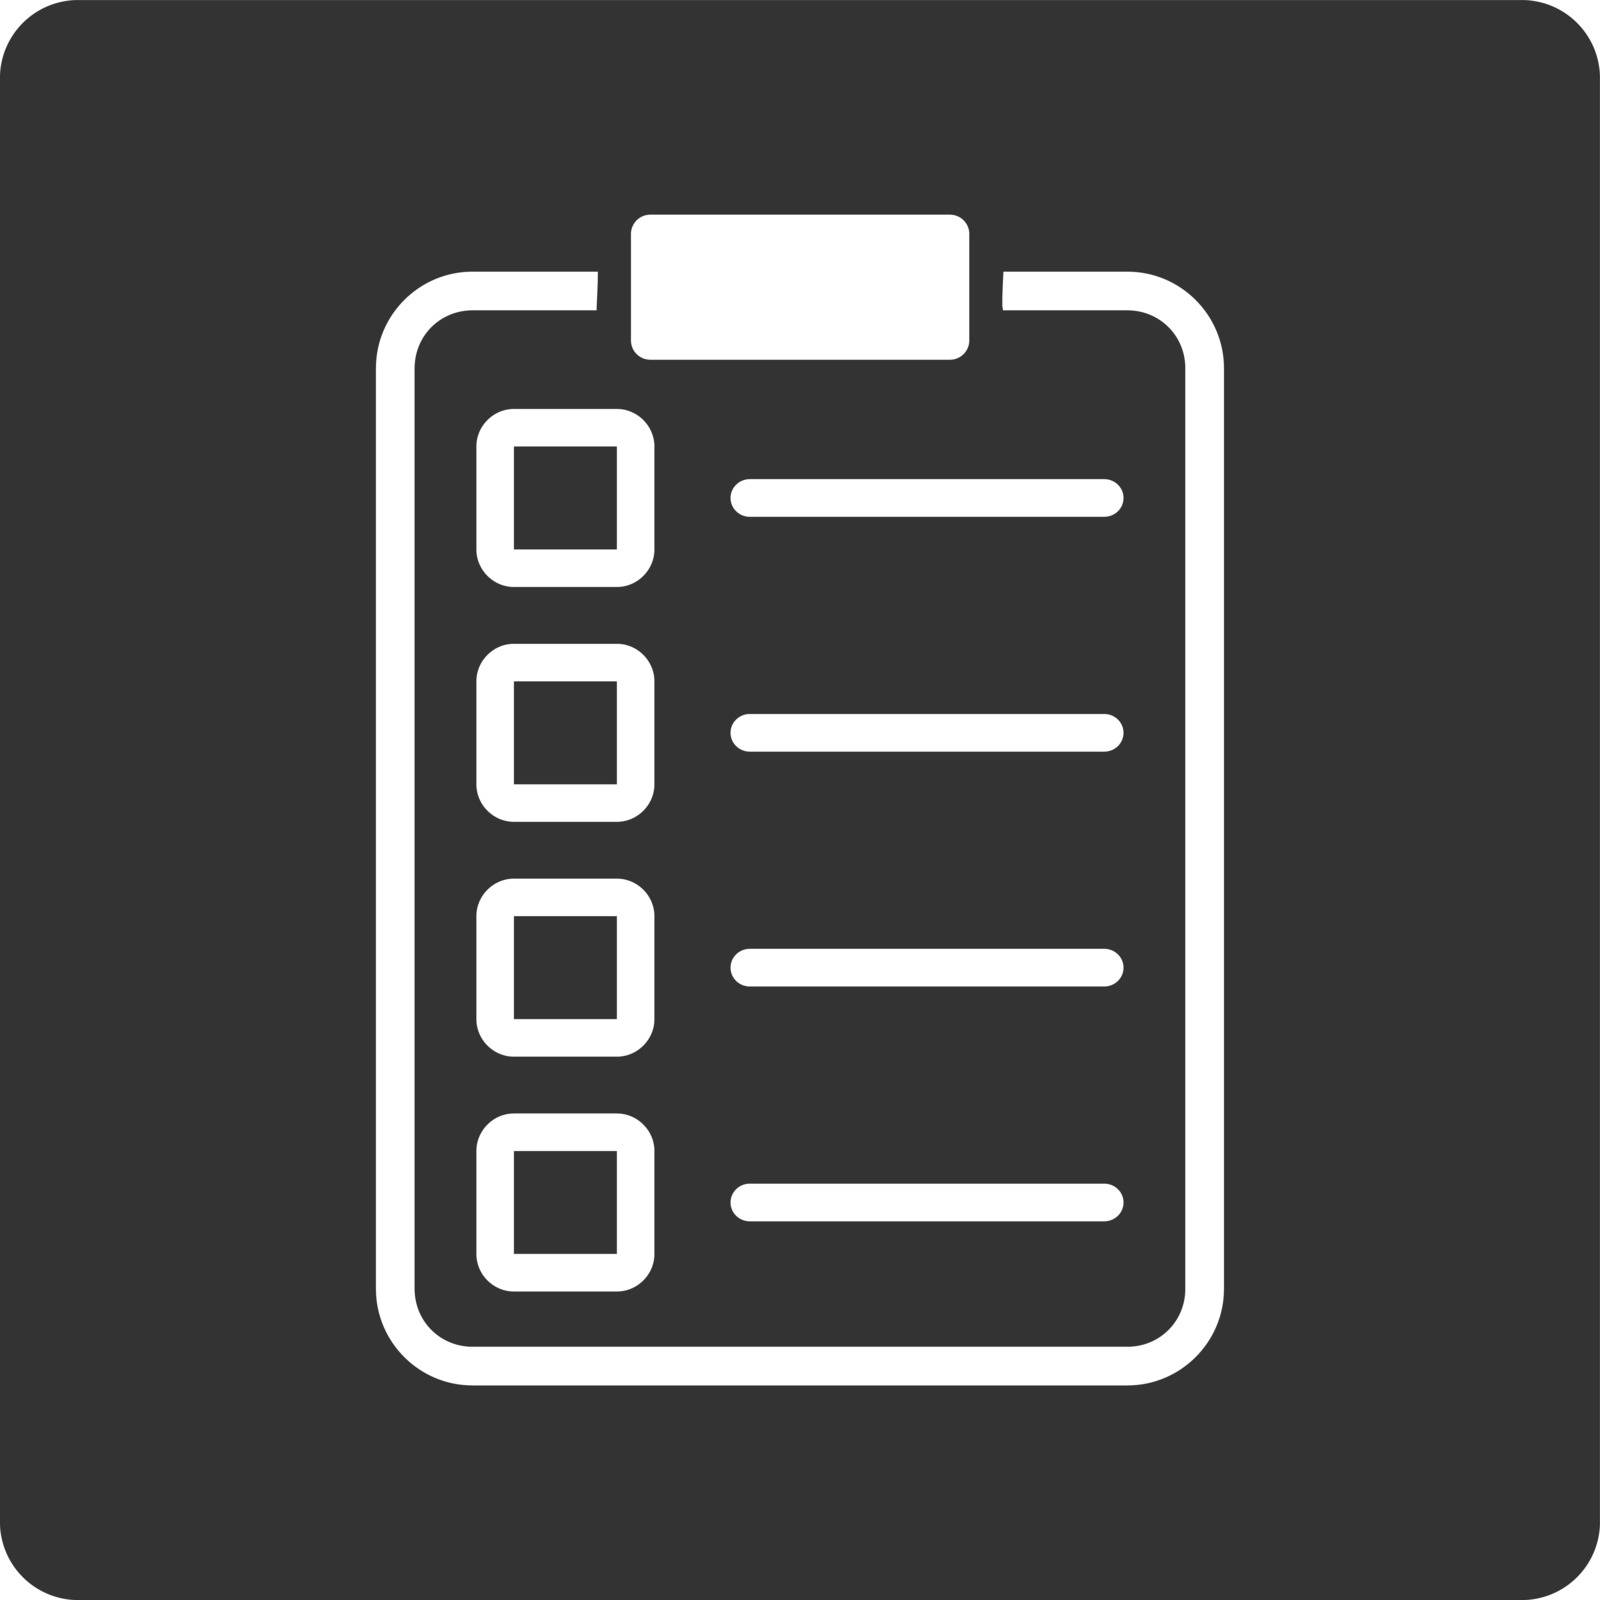 Examination icon. Vector style is white and gray colors, flat rounded square button on a white background.